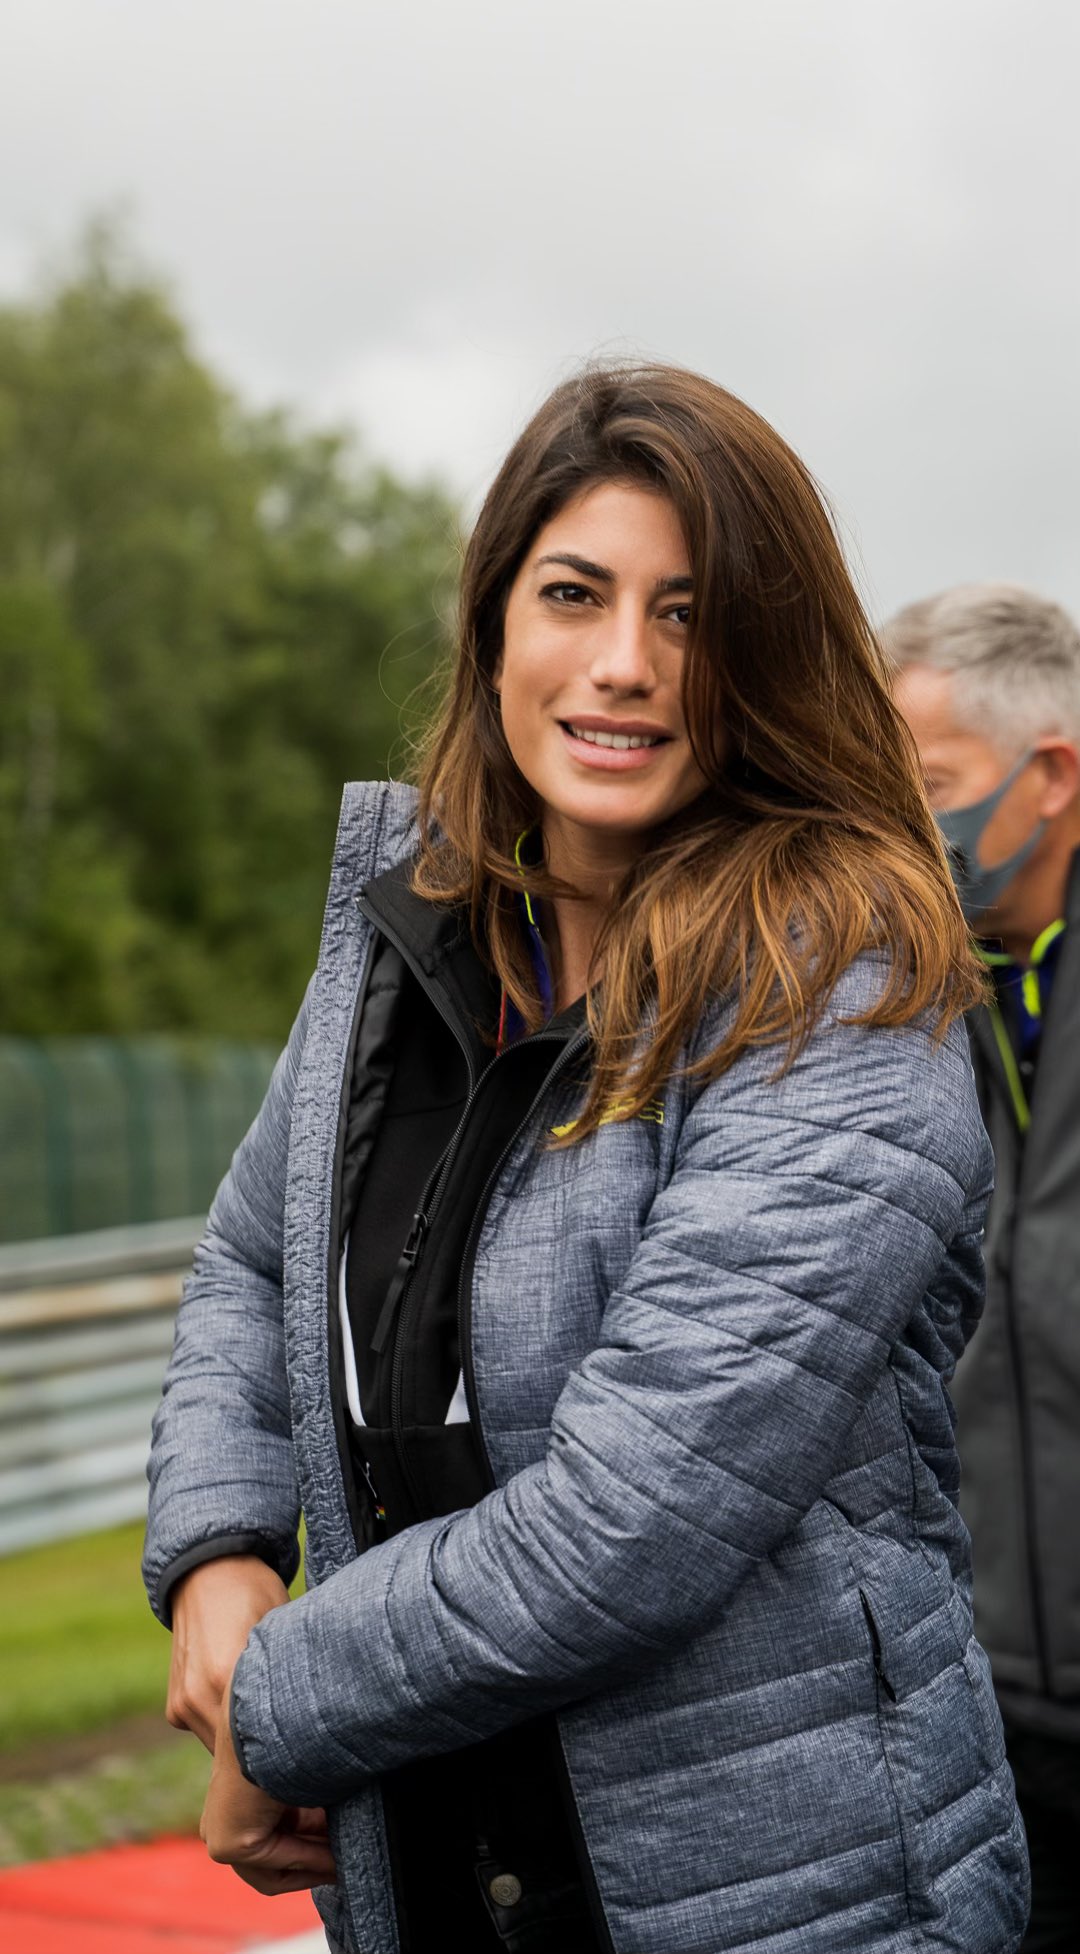 My smile when I think of driving in Spa-Francorchamps tomorrow 😍😍🎉🎉🎊